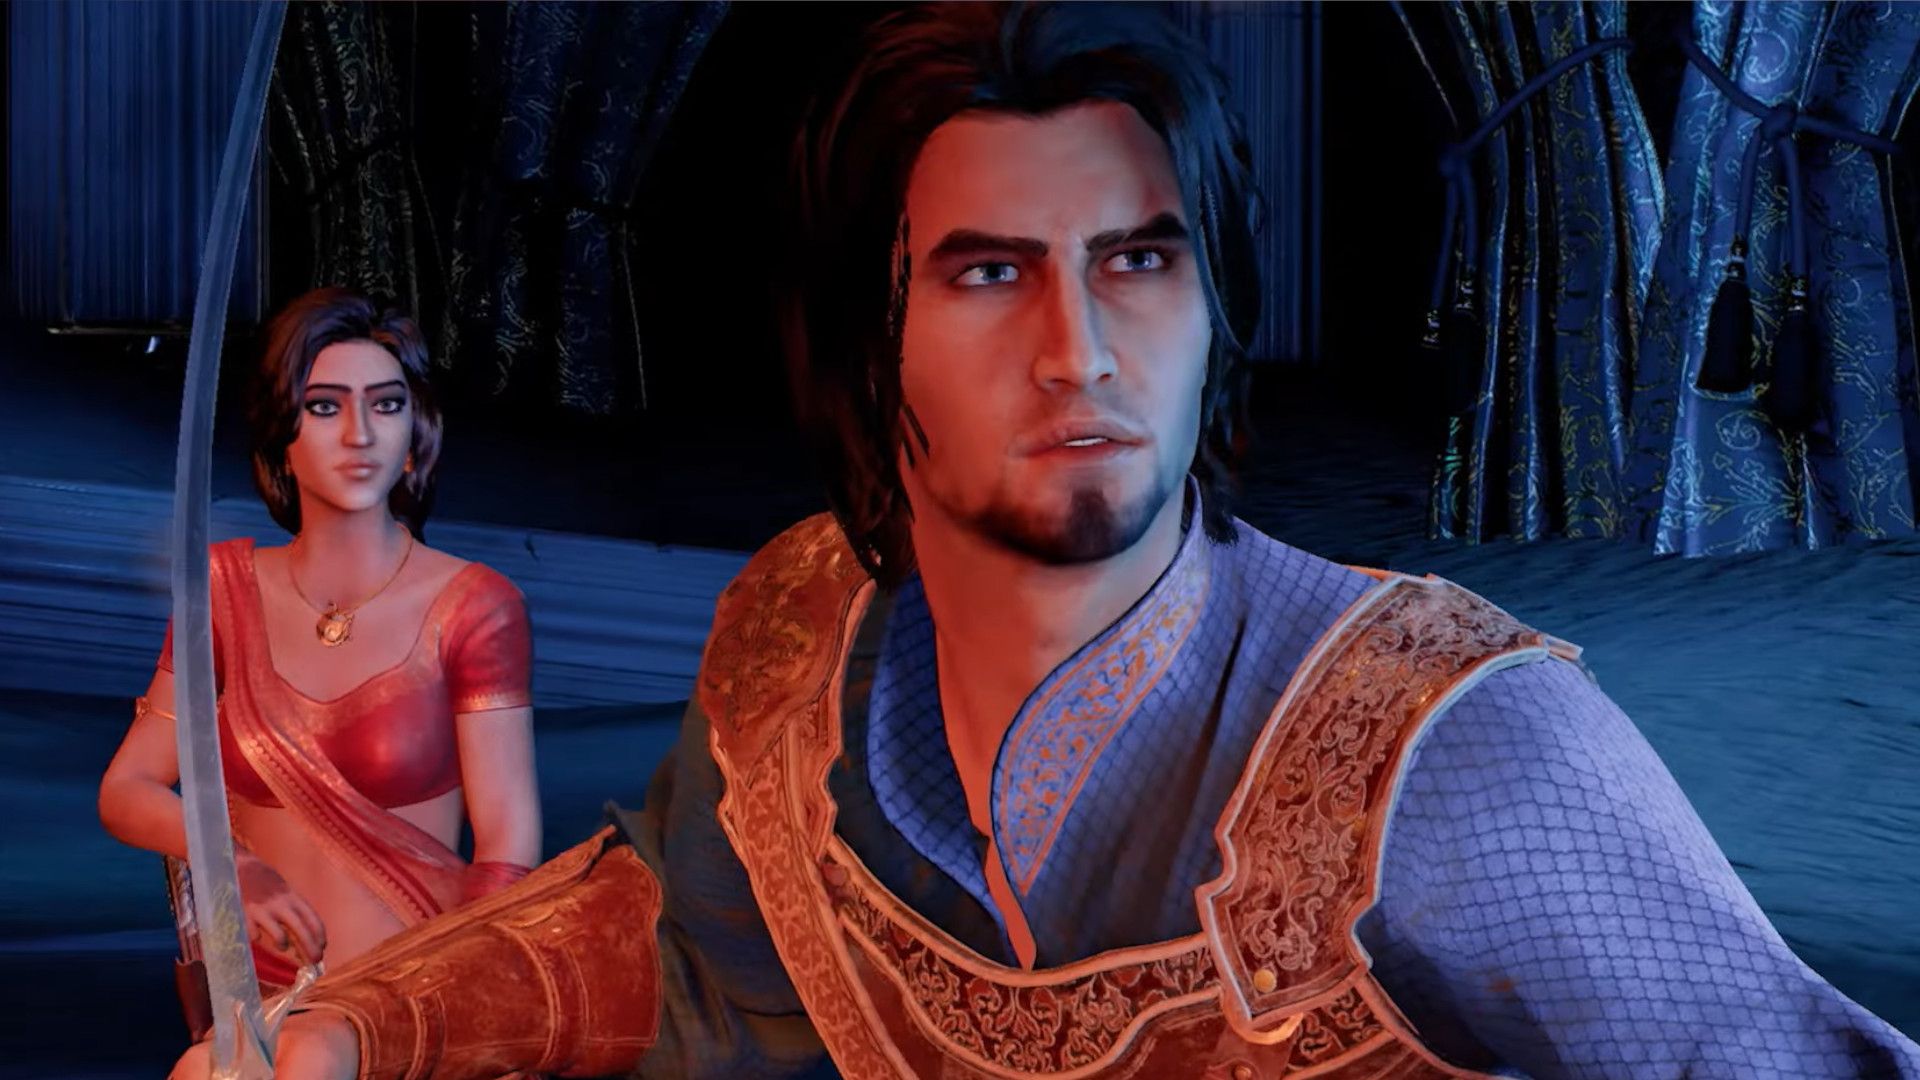 Prince of Persia: Sands of Time remake confirmed for January 2021